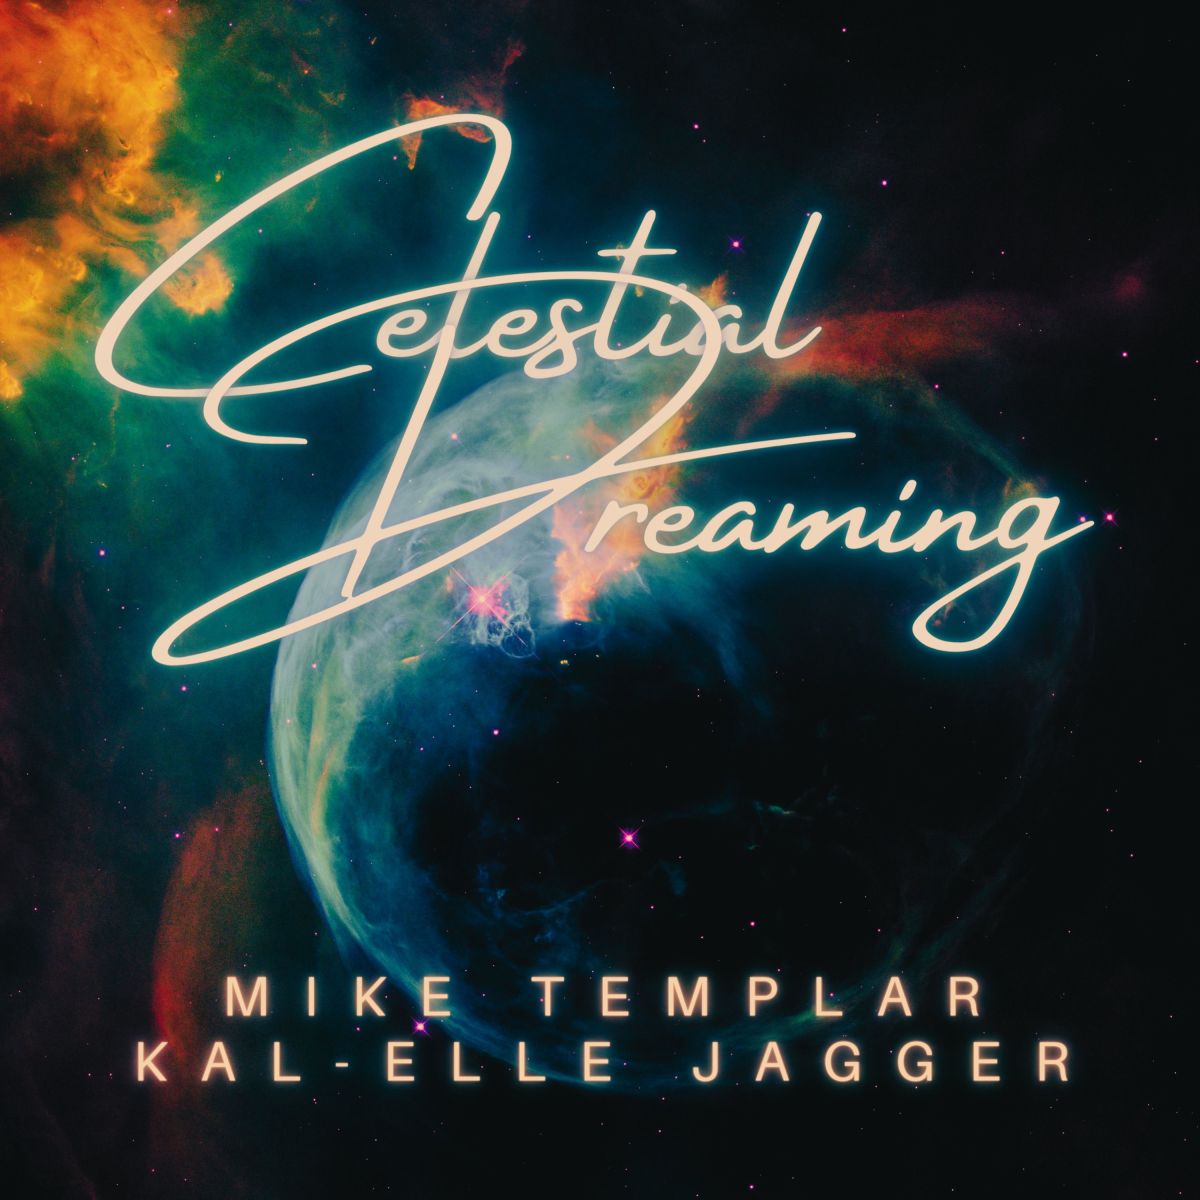 Synth Single Review: “Celestial Dreaming” by Mike Templar & Kal-Elle Jagger